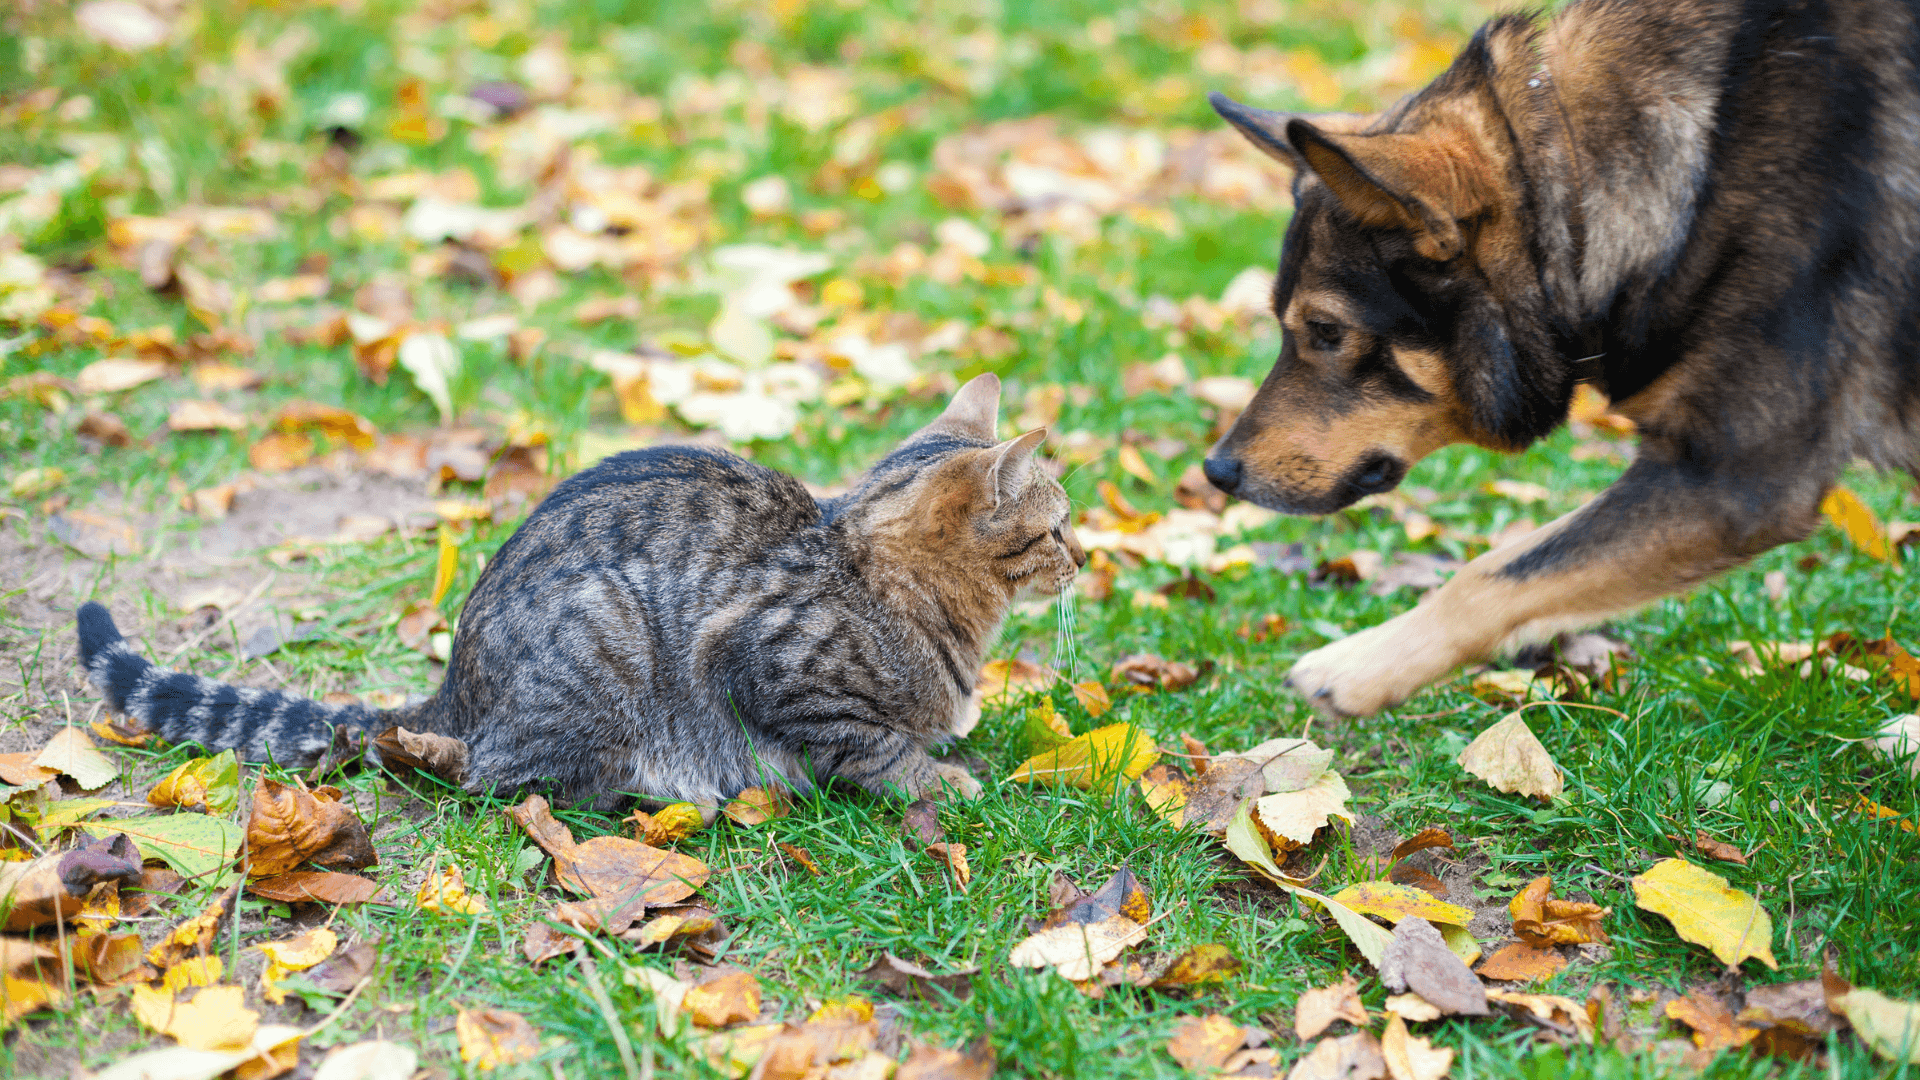 Why Do Cats and Dogs Fight? There are many scenarios.